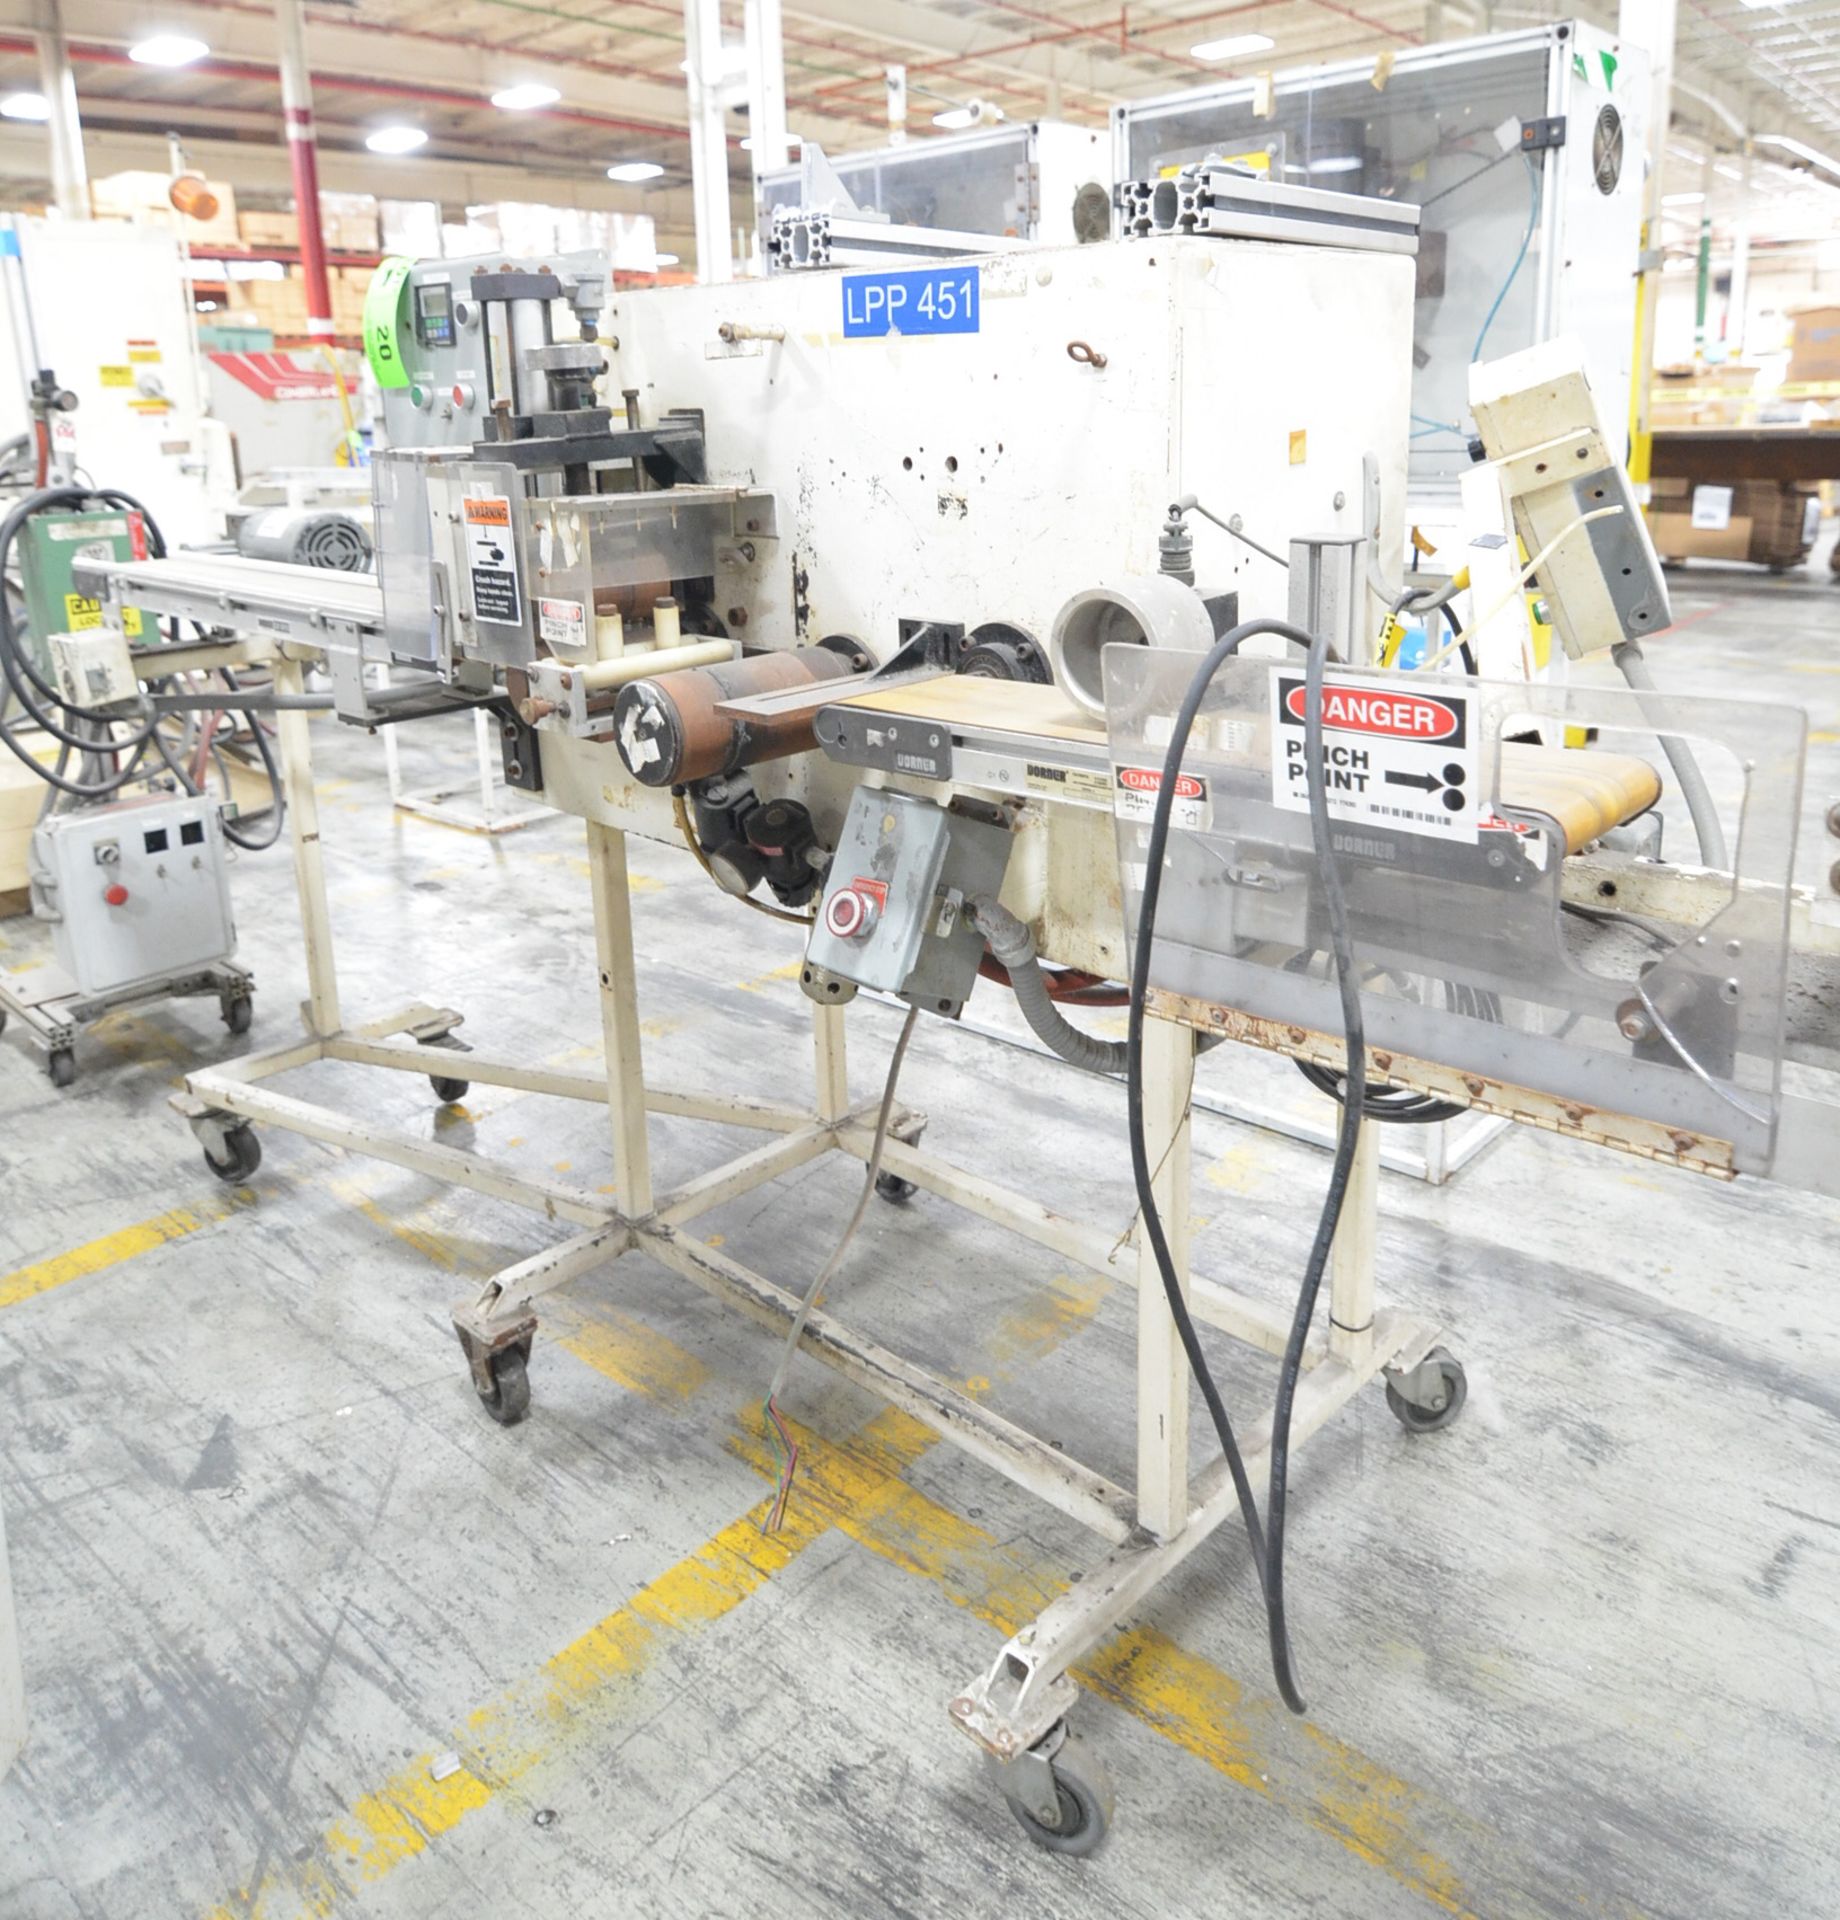 MFG UNKNOWN PORTABLE IN-LINE CUTTER WITH DURANT DIGITAL MICROPROCESSOR CONTROL, 5" PNEUMATIC - Image 2 of 4